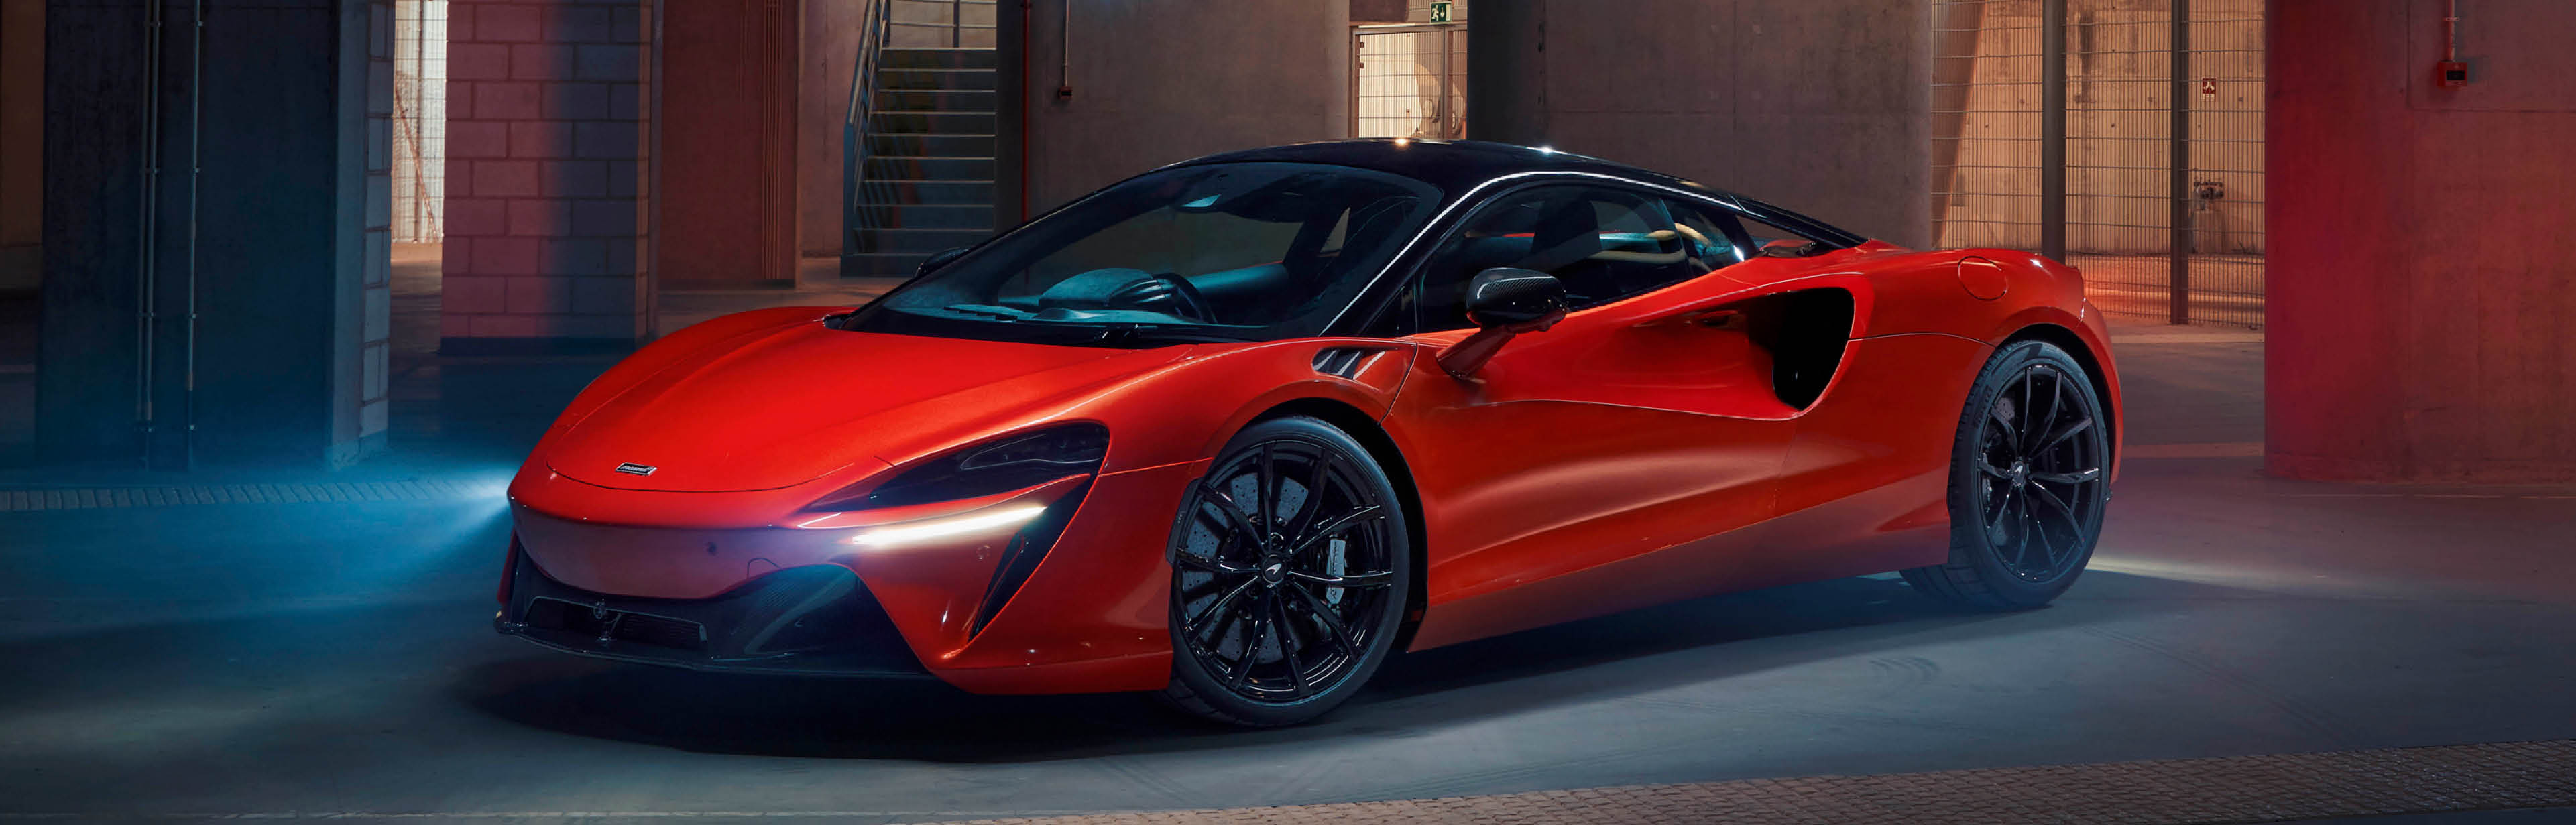 Own your Mclaren Hybrid Electric today from Mclaren Tampa Bay